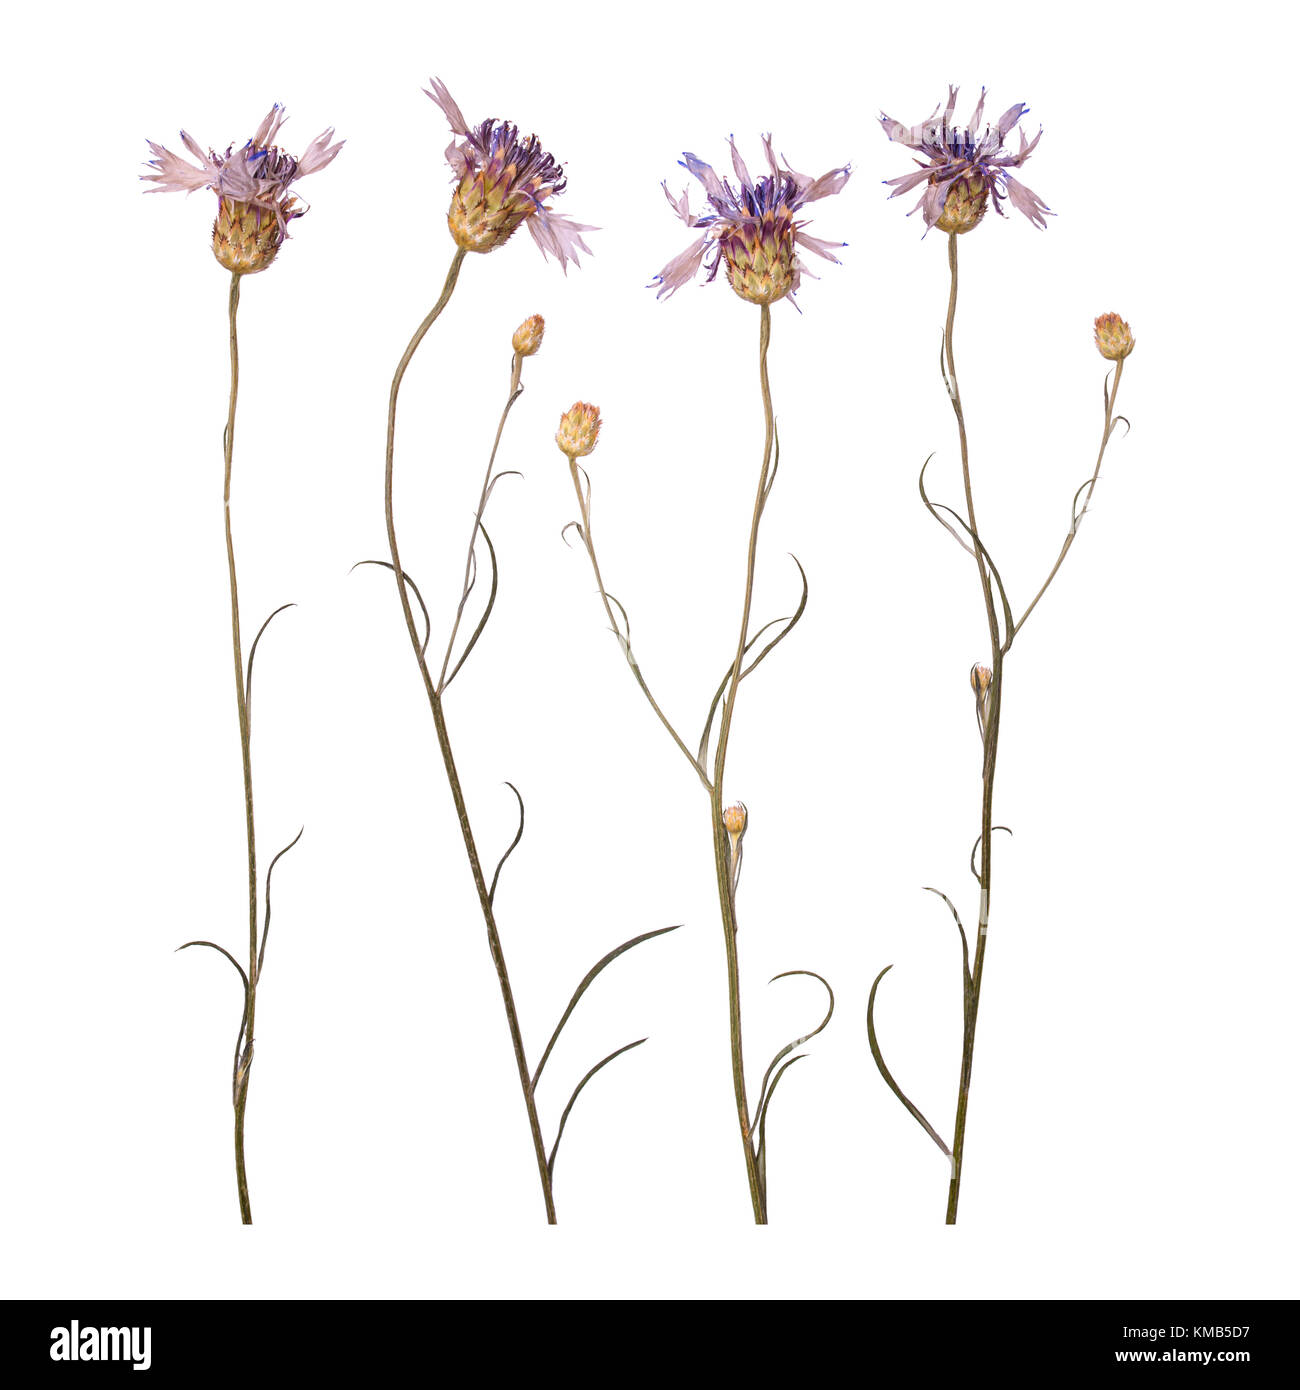 Dried and pressed flowers of cornflowers isolated on white background. Herbarium of blue flowers Stock Photo